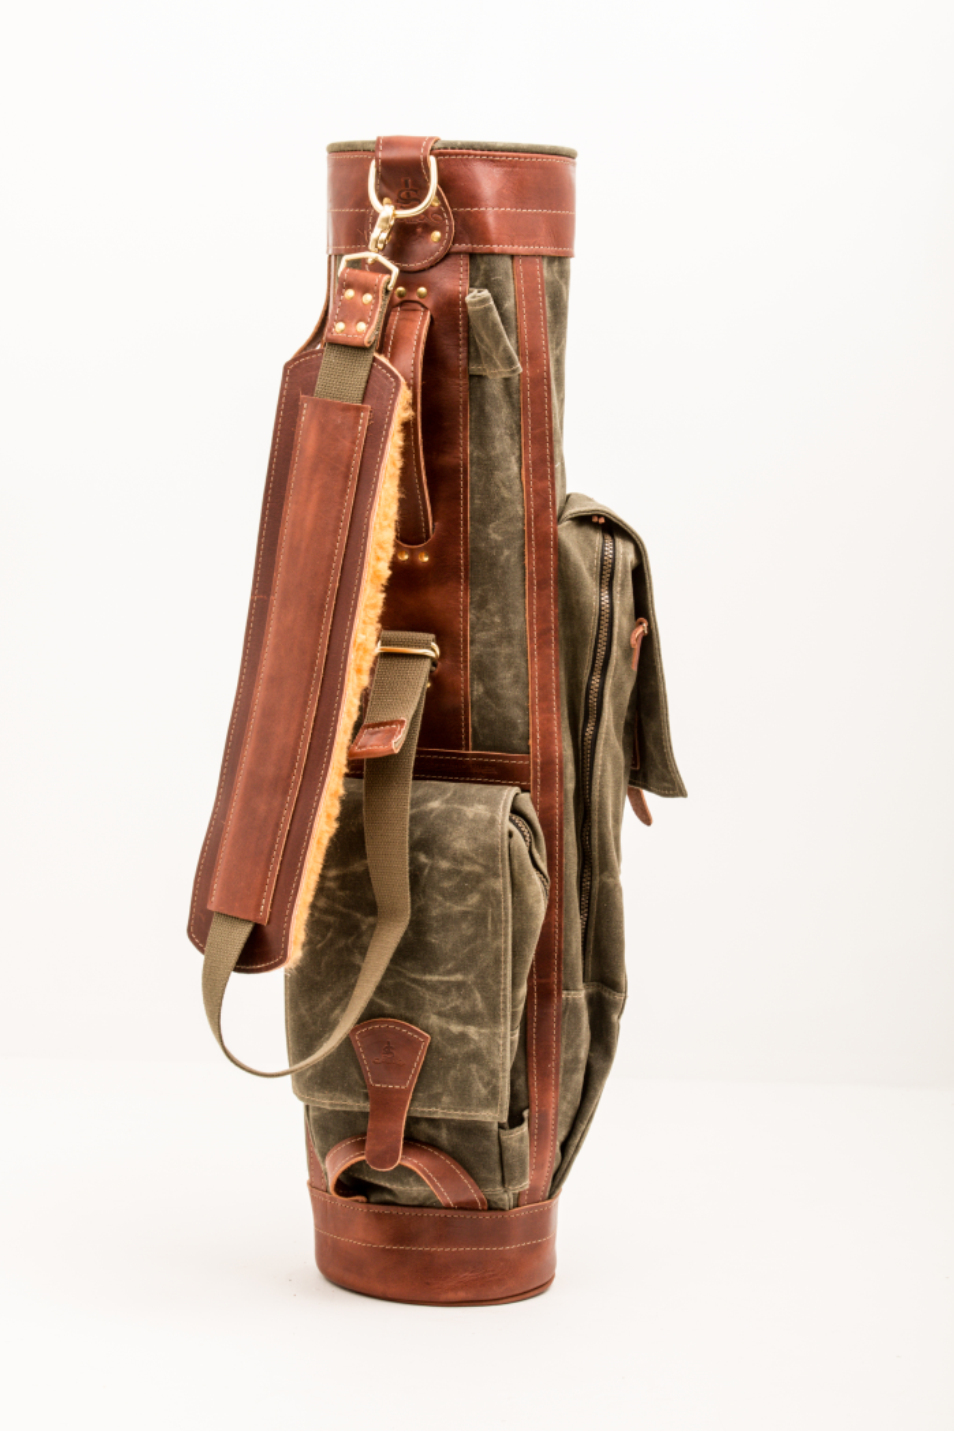 Olive Waxed Cotton Duck Canvas with Chestnut Leather Trim  8" Airliner Tour Style Golf Bag